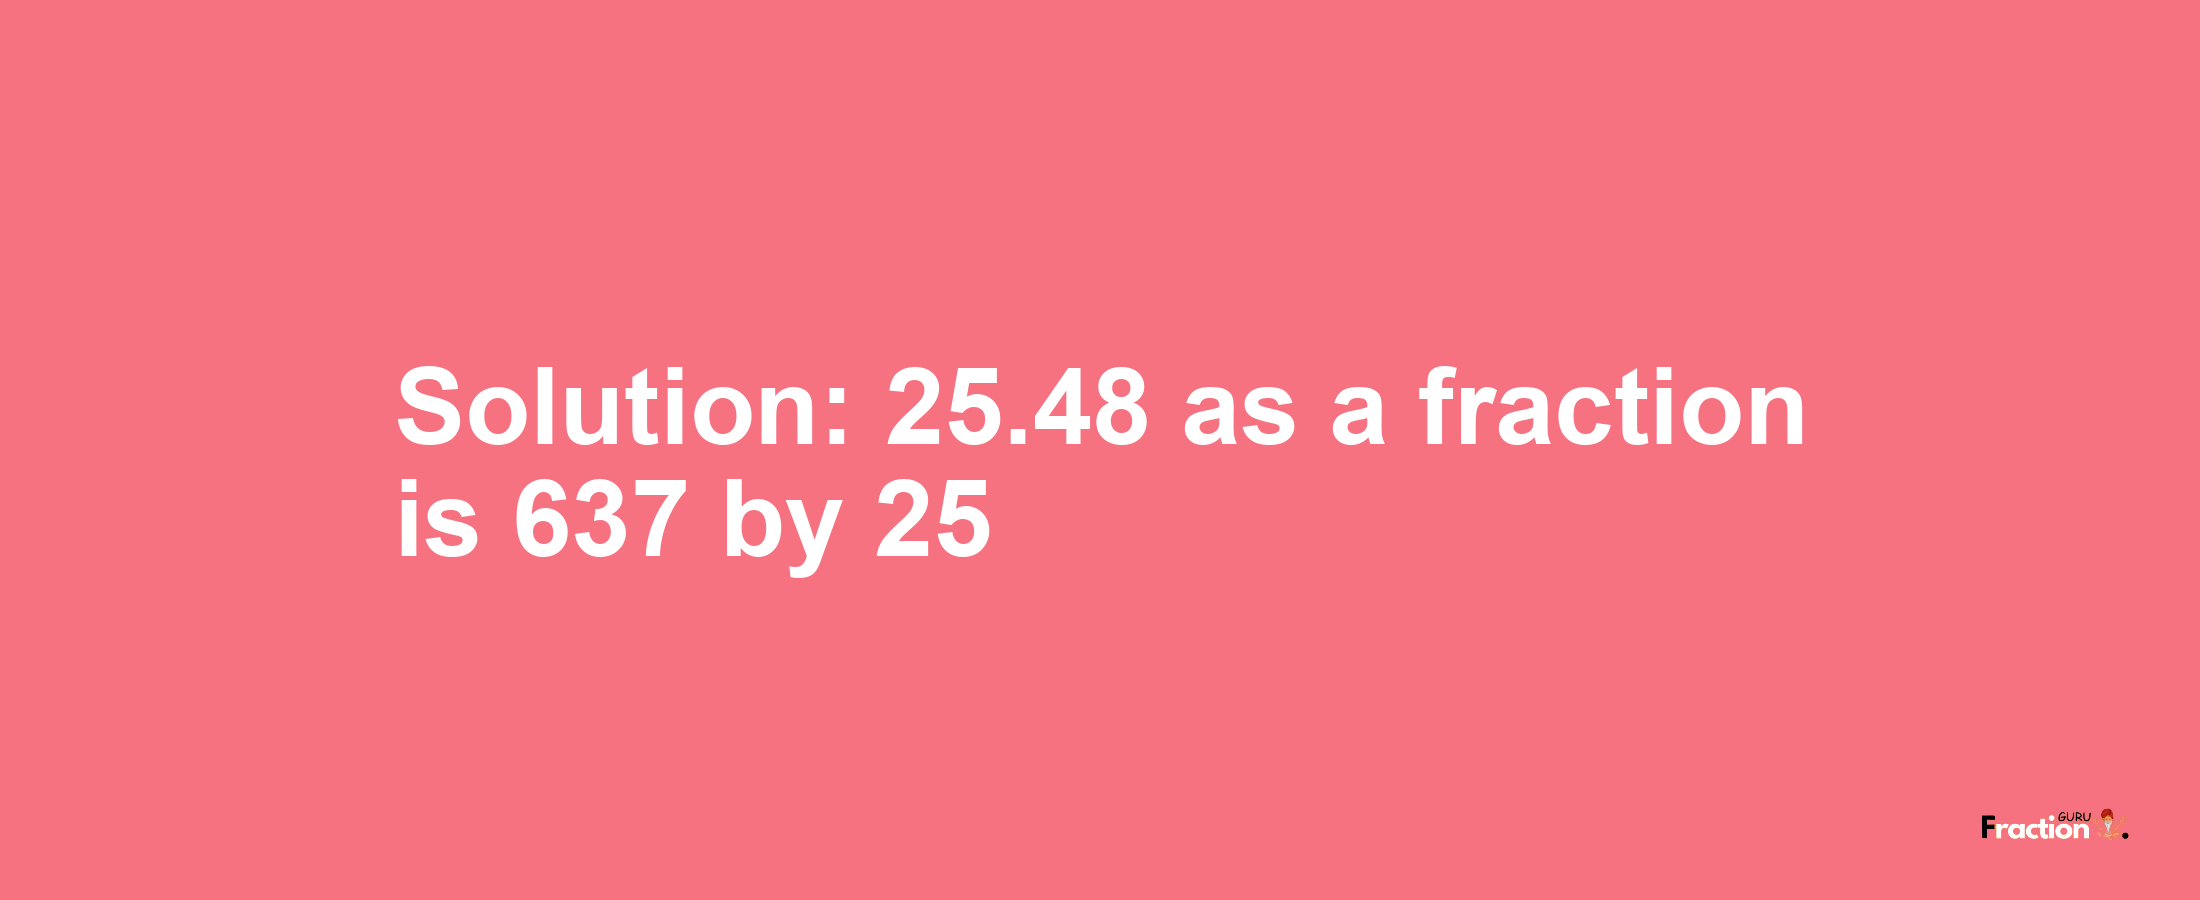 Solution:25.48 as a fraction is 637/25